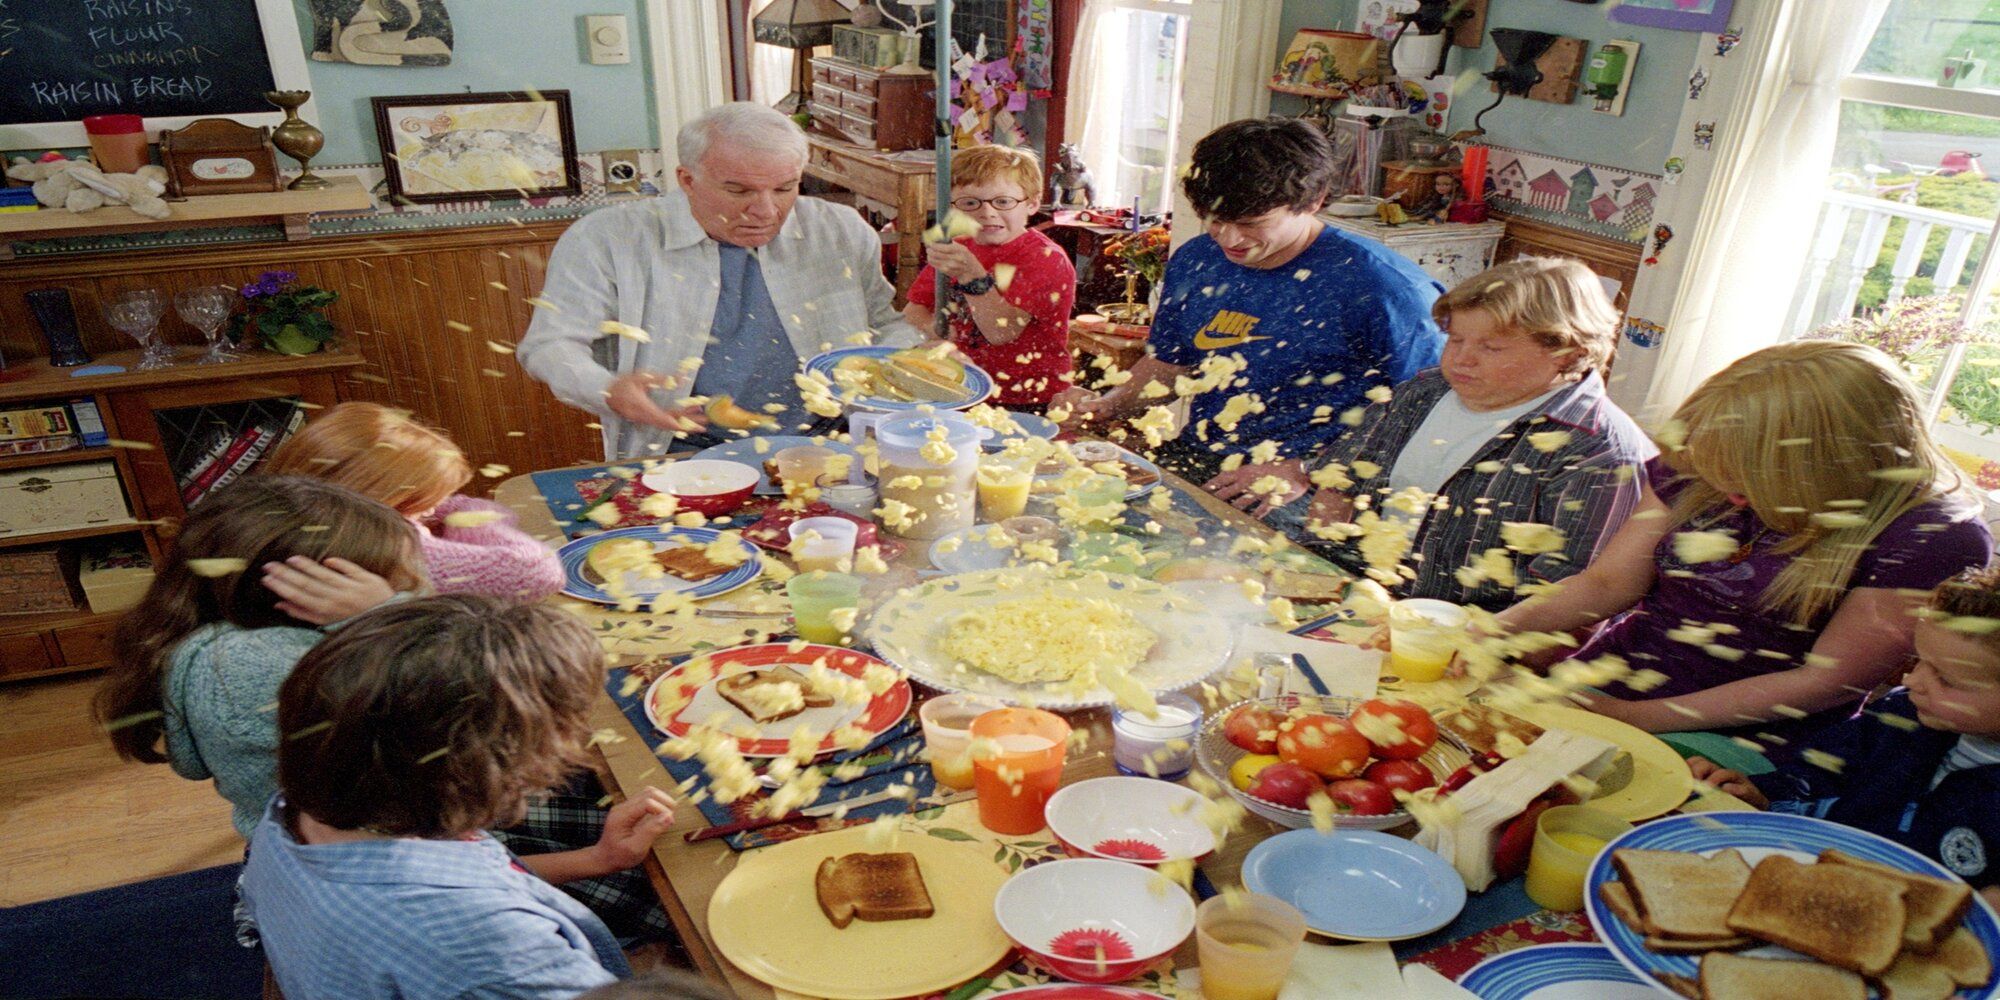 Original Cheaper By The Dozen Family At Breakfast as the Frog Beanz falls into their breakfast and egg goes all over the family members